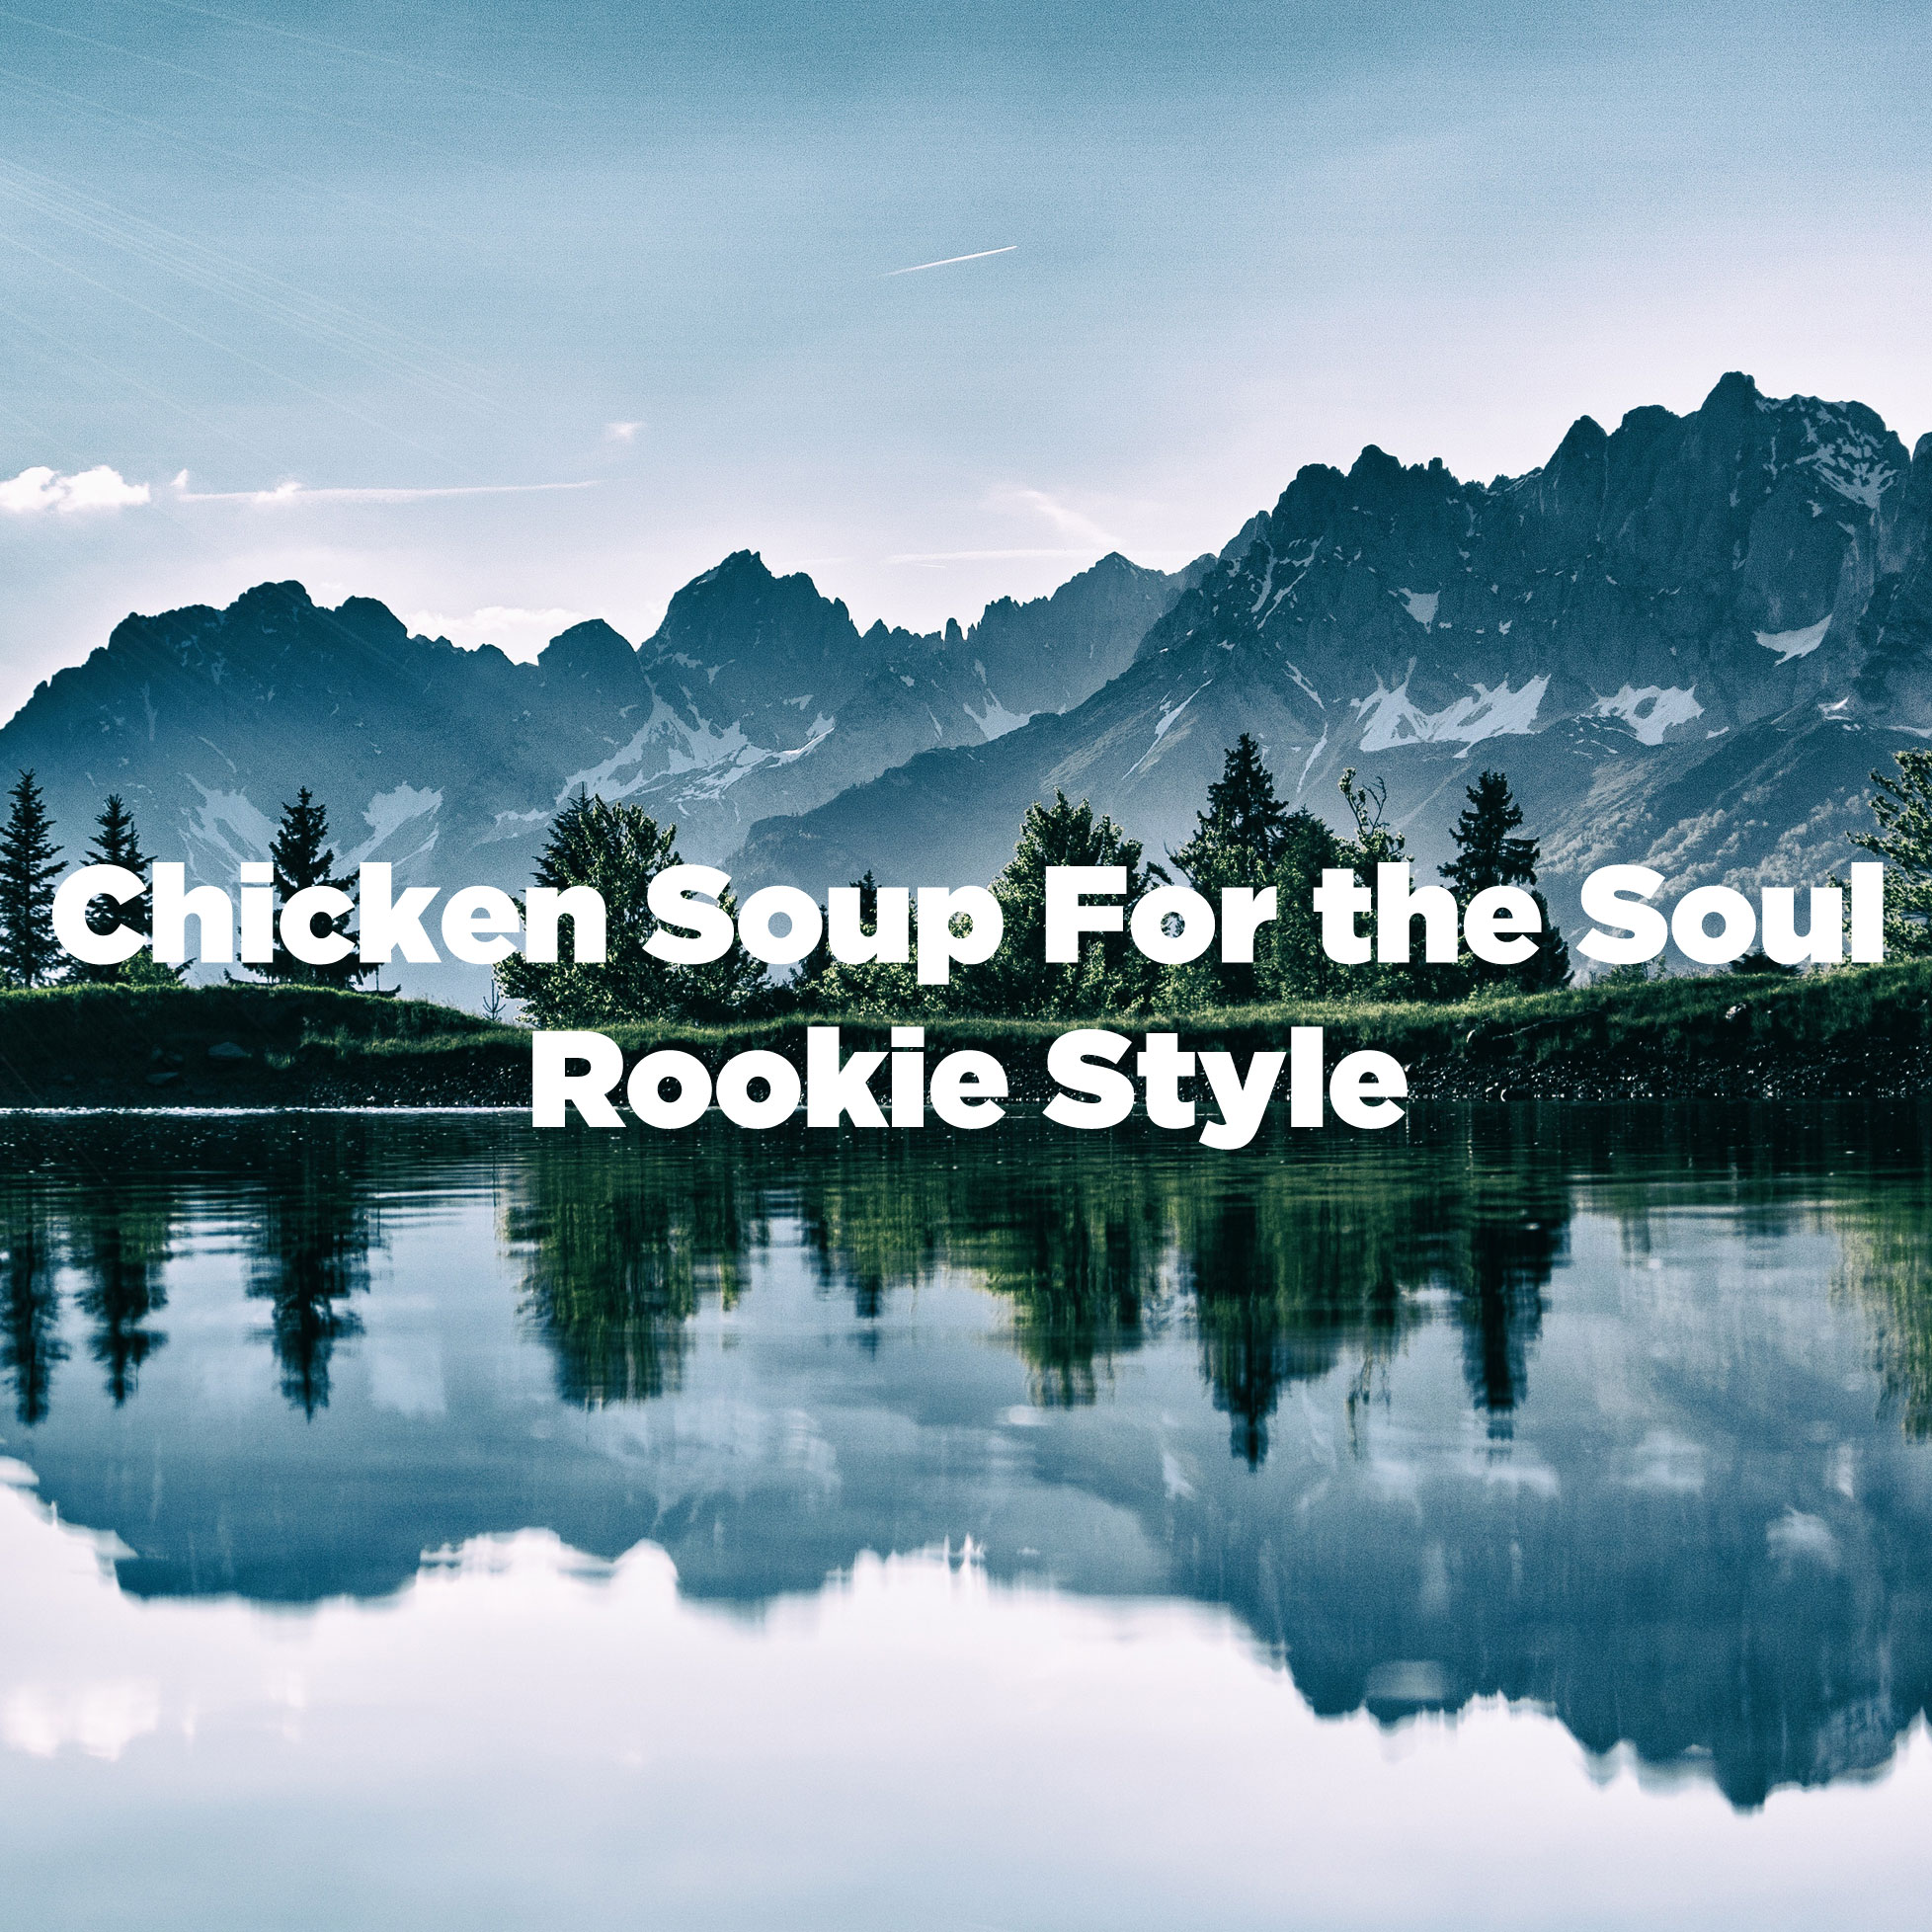 A photo of water and mountains with the text Chicken soup for the soul rookie style